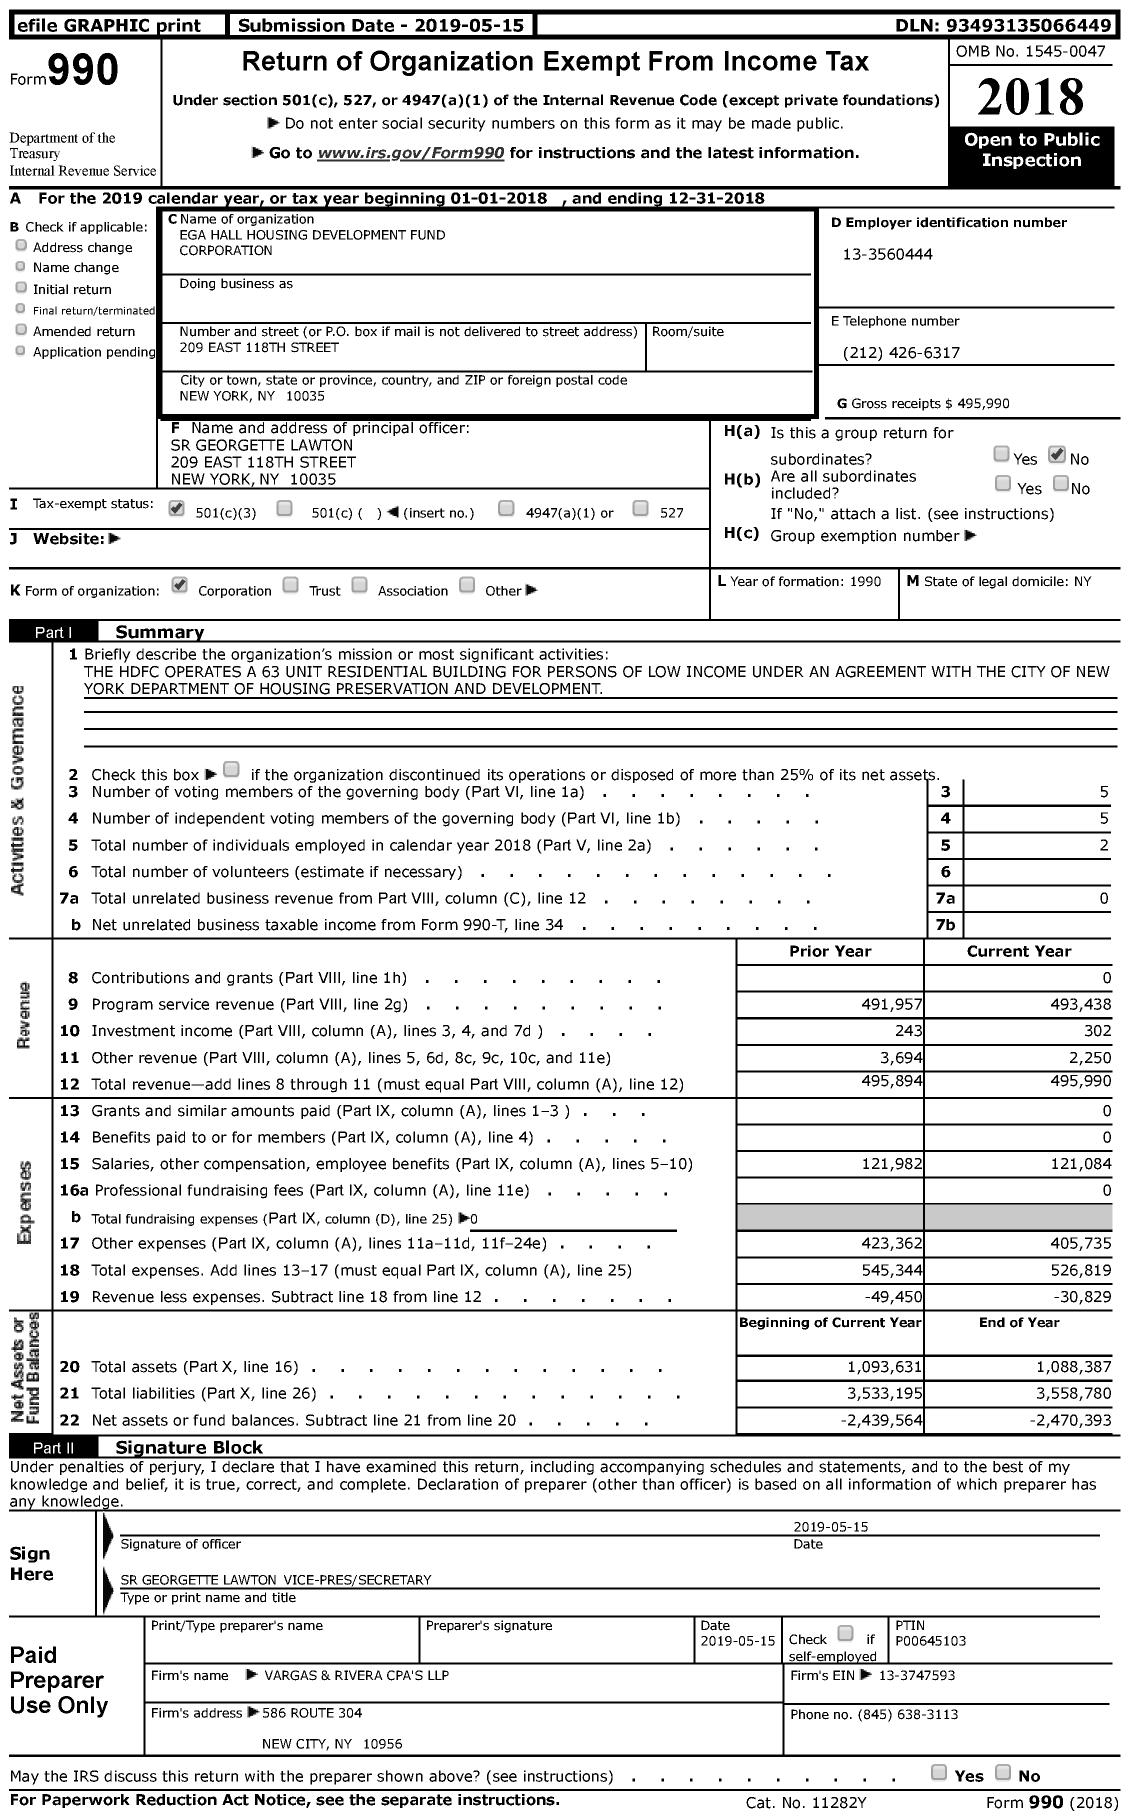 Image of first page of 2018 Form 990 for Ega Hall Housing Development Fund Corporation